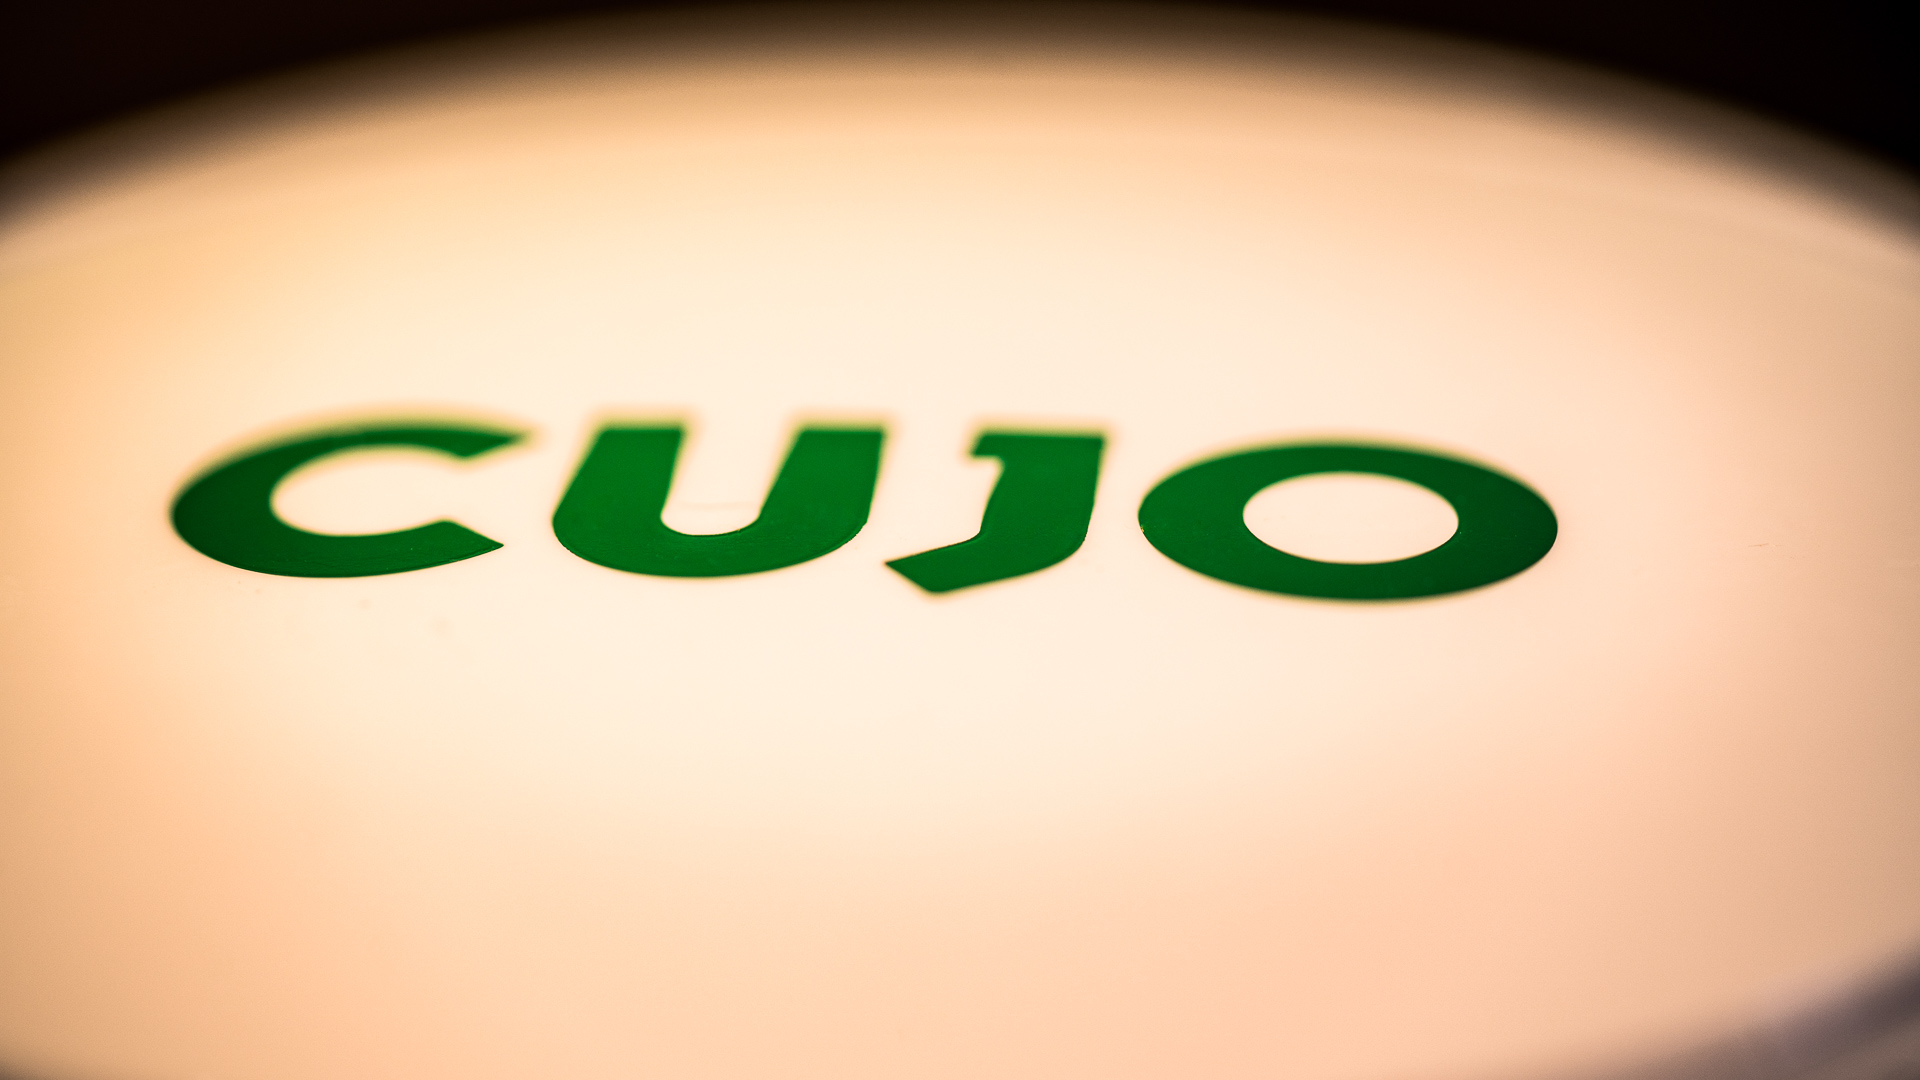 cujo, web security, smart home, home network security